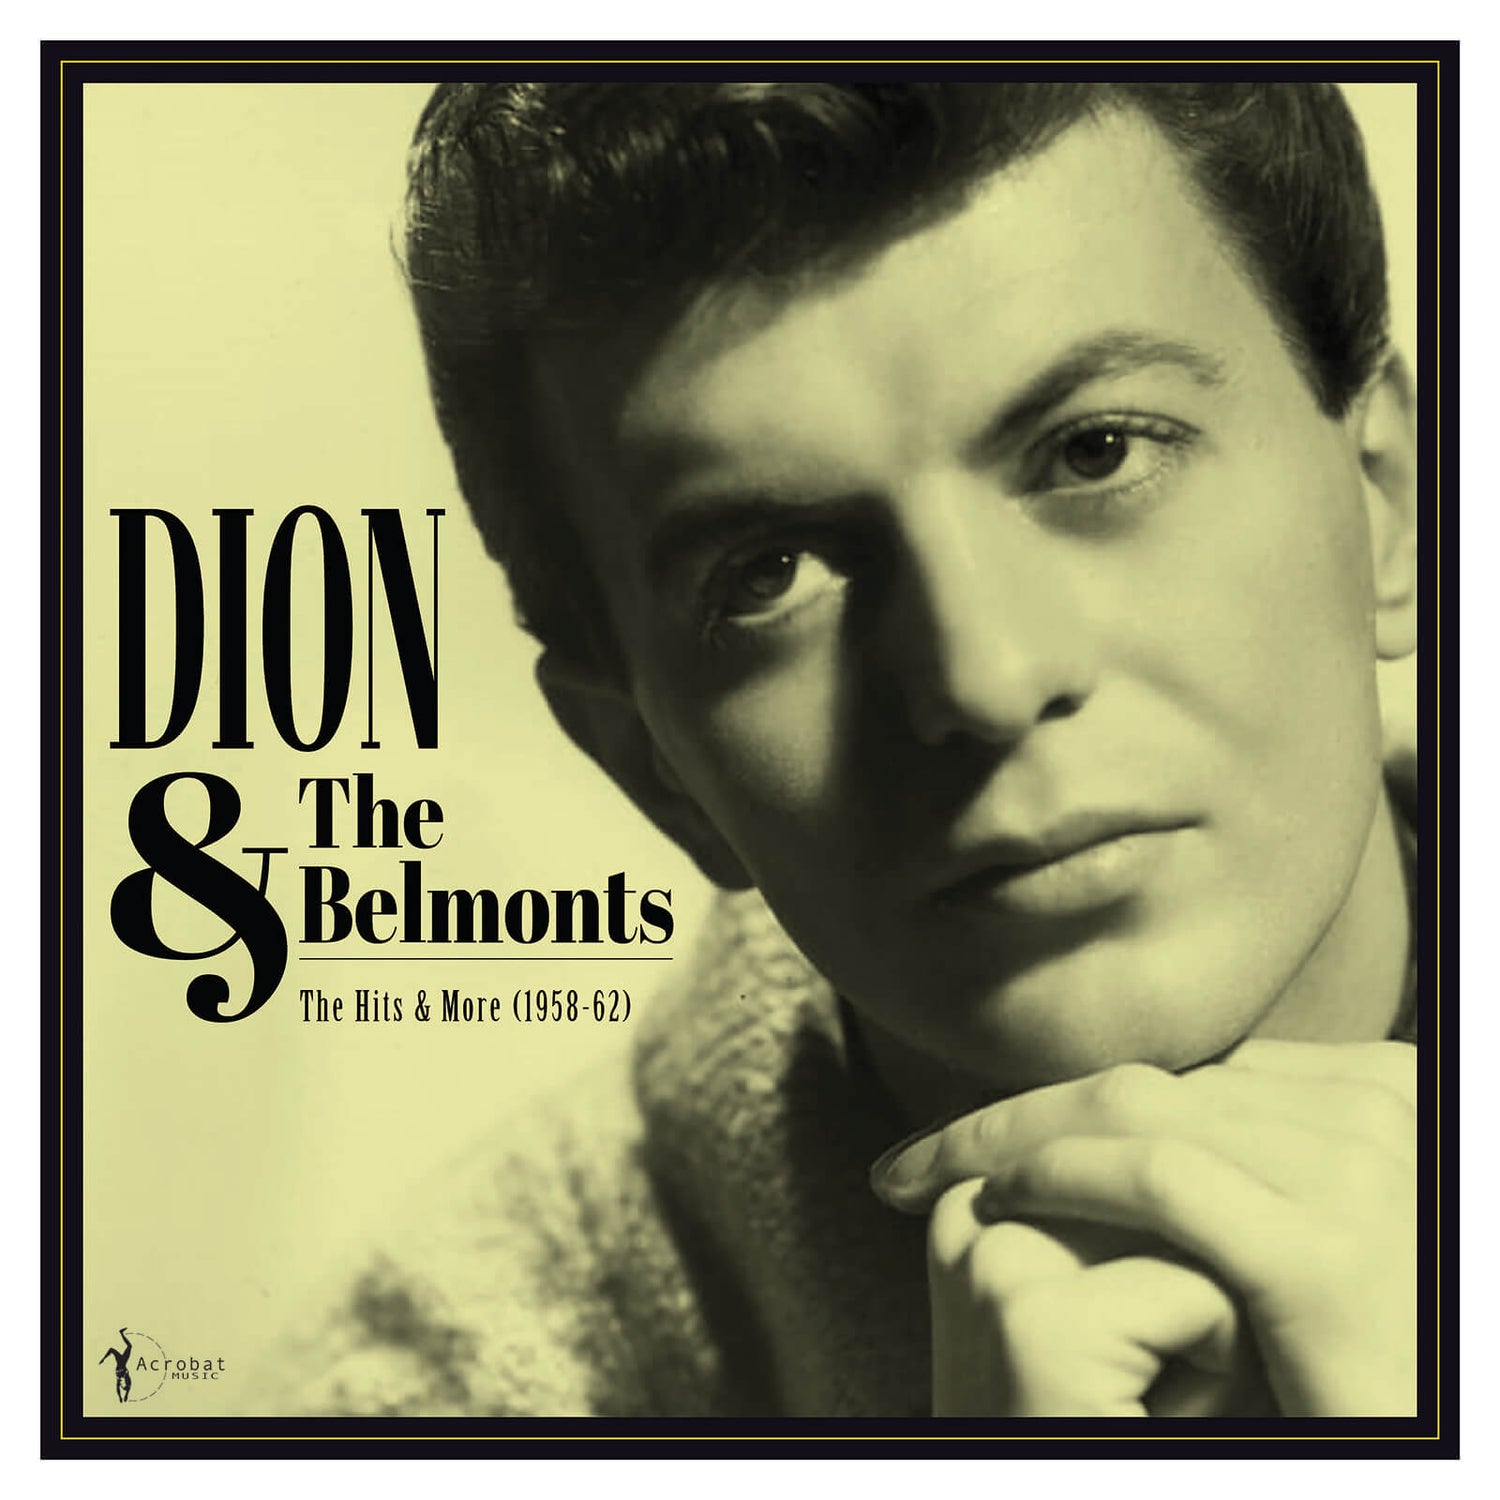 Dion & The Belmonts - The Hits & More: 1958-62 Vinyl